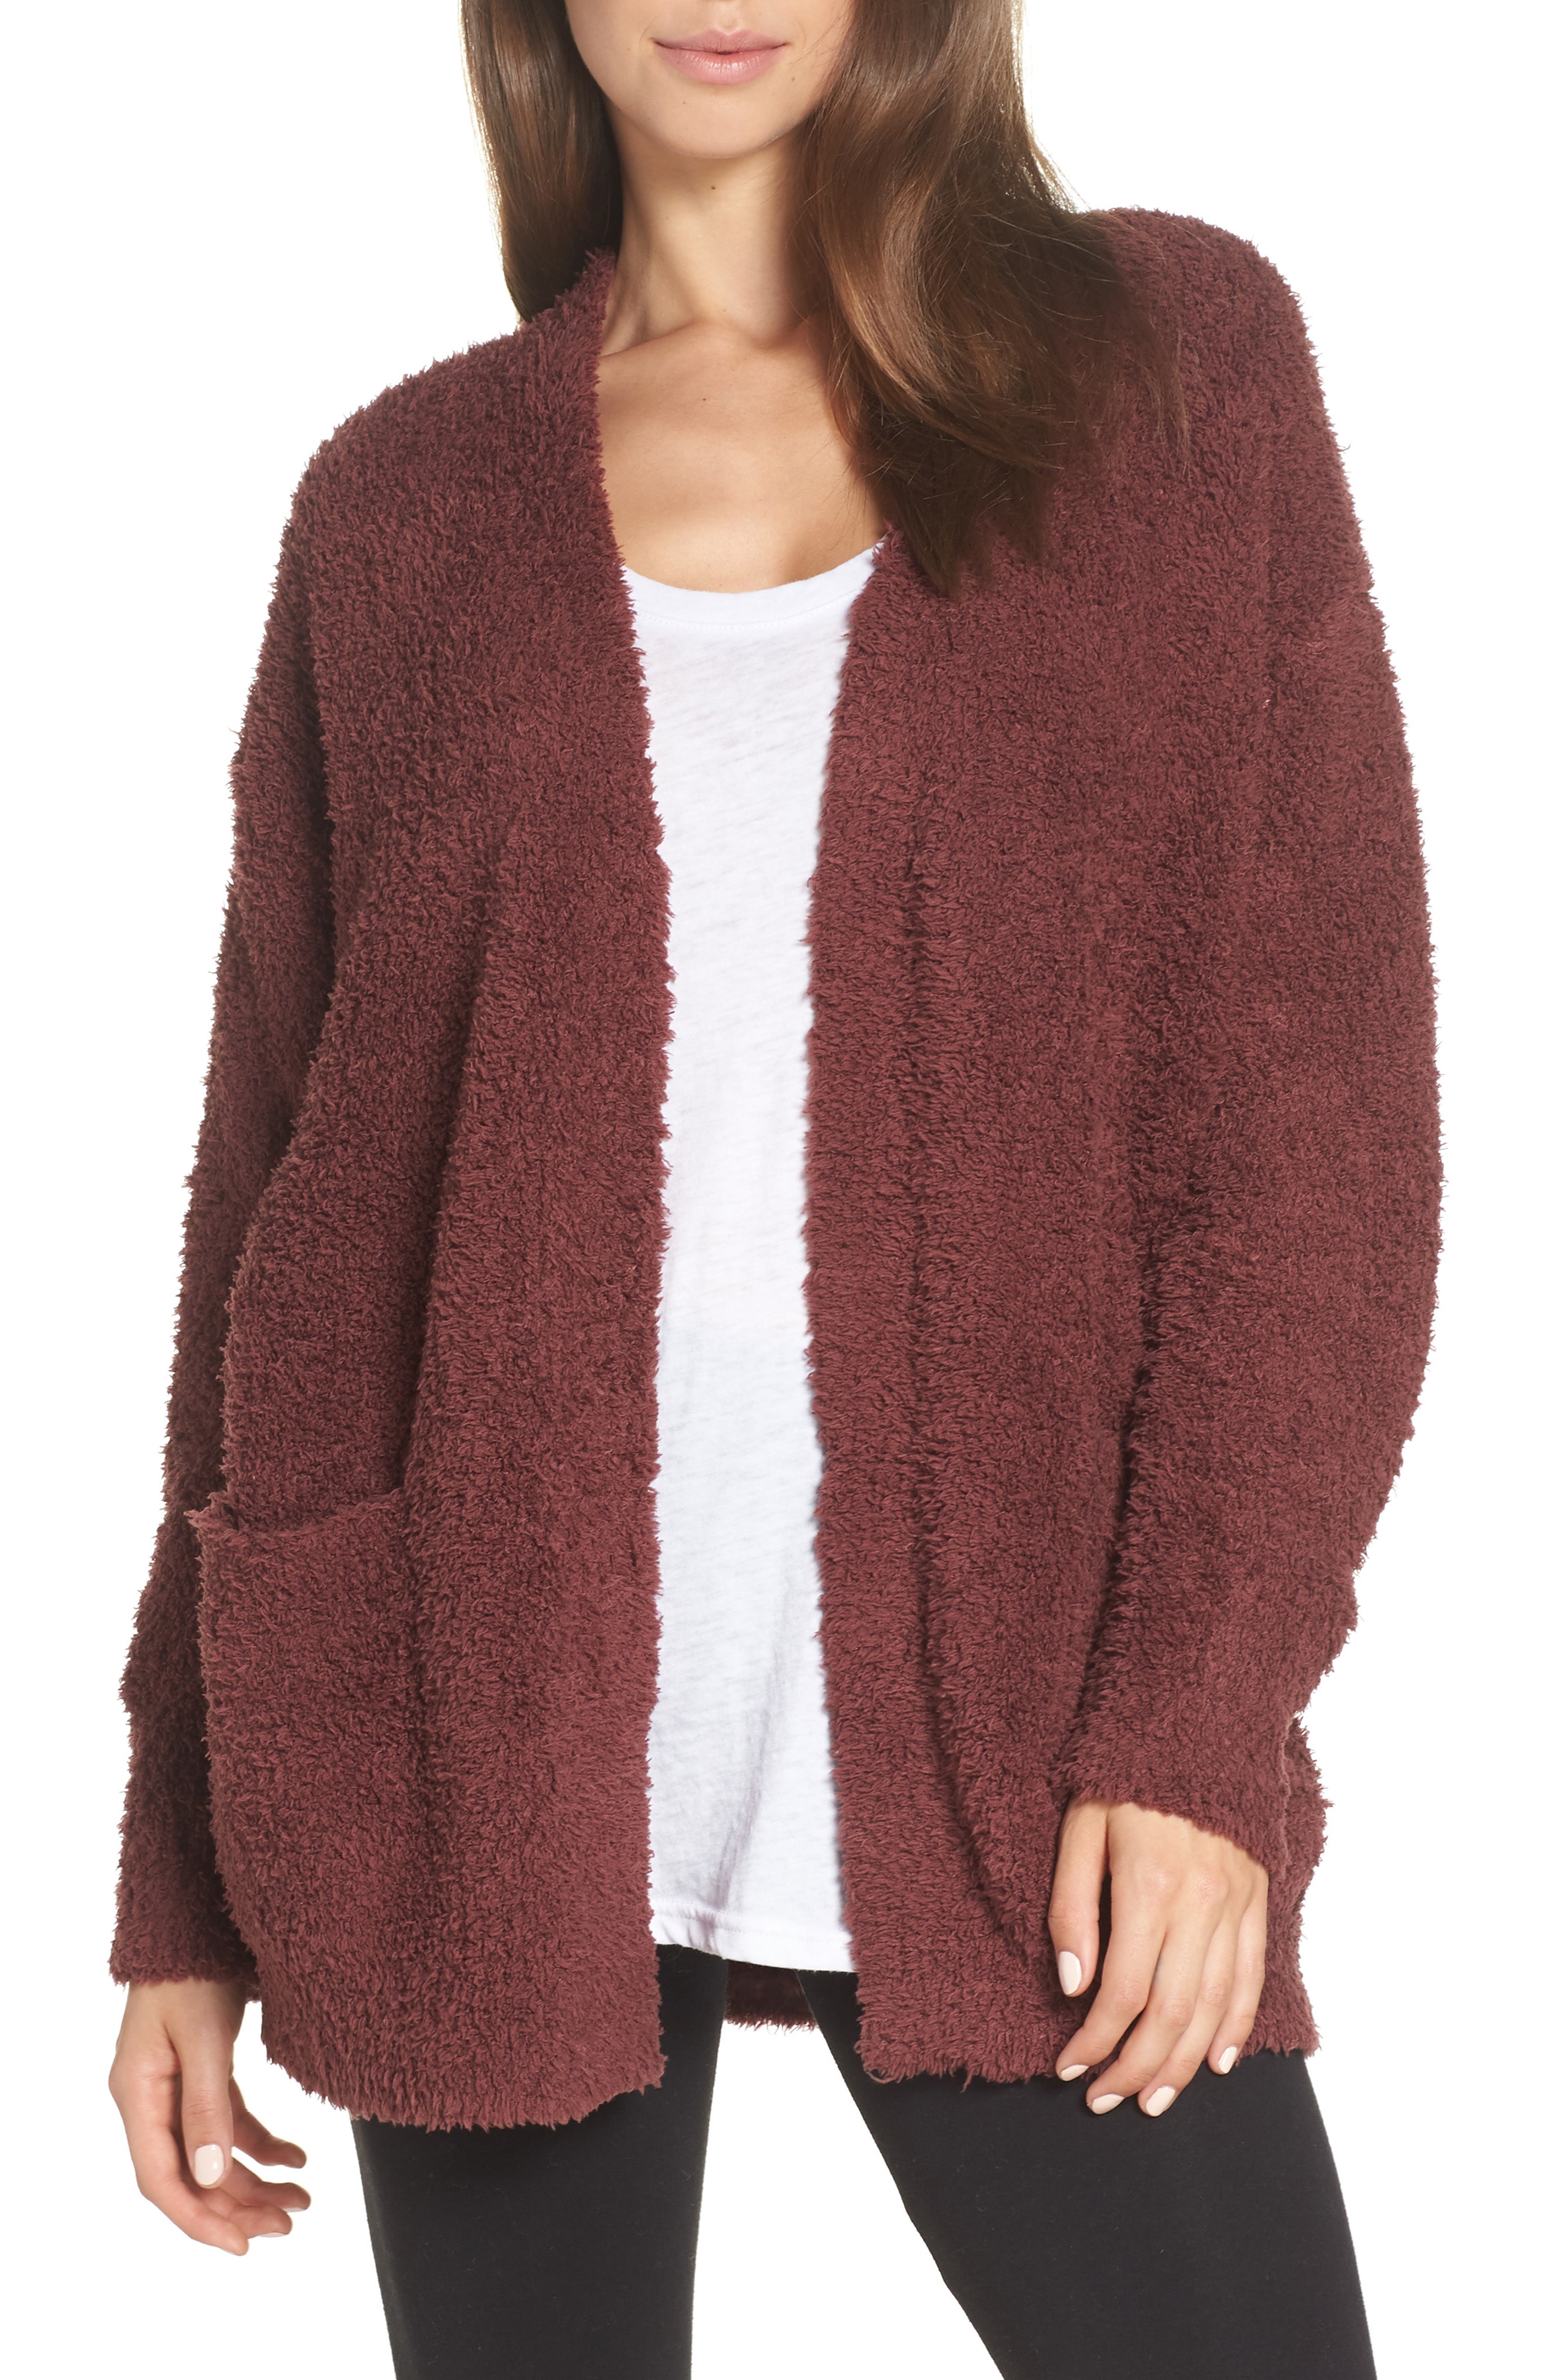 Women's Red Cardigan Sweaters | Nordstrom